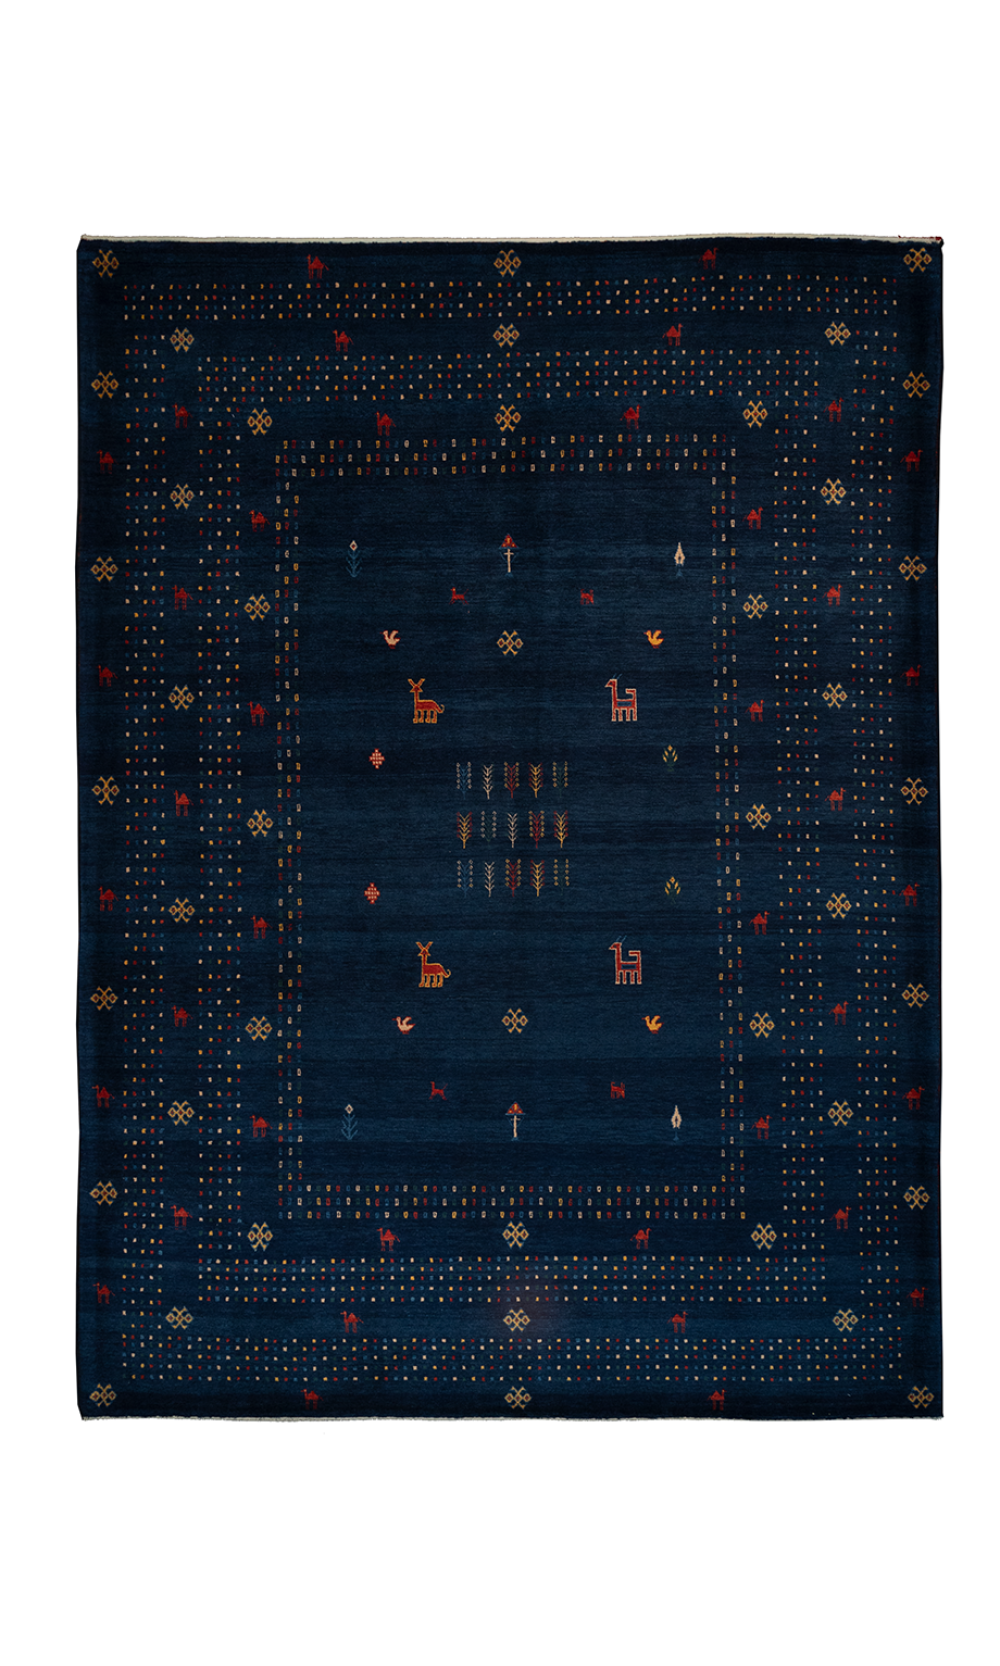 Handmade Gabbeh Rug In Wool & Navy Blue Color Shiraz | 291×207 cm | AFSHAAN(Curved design)